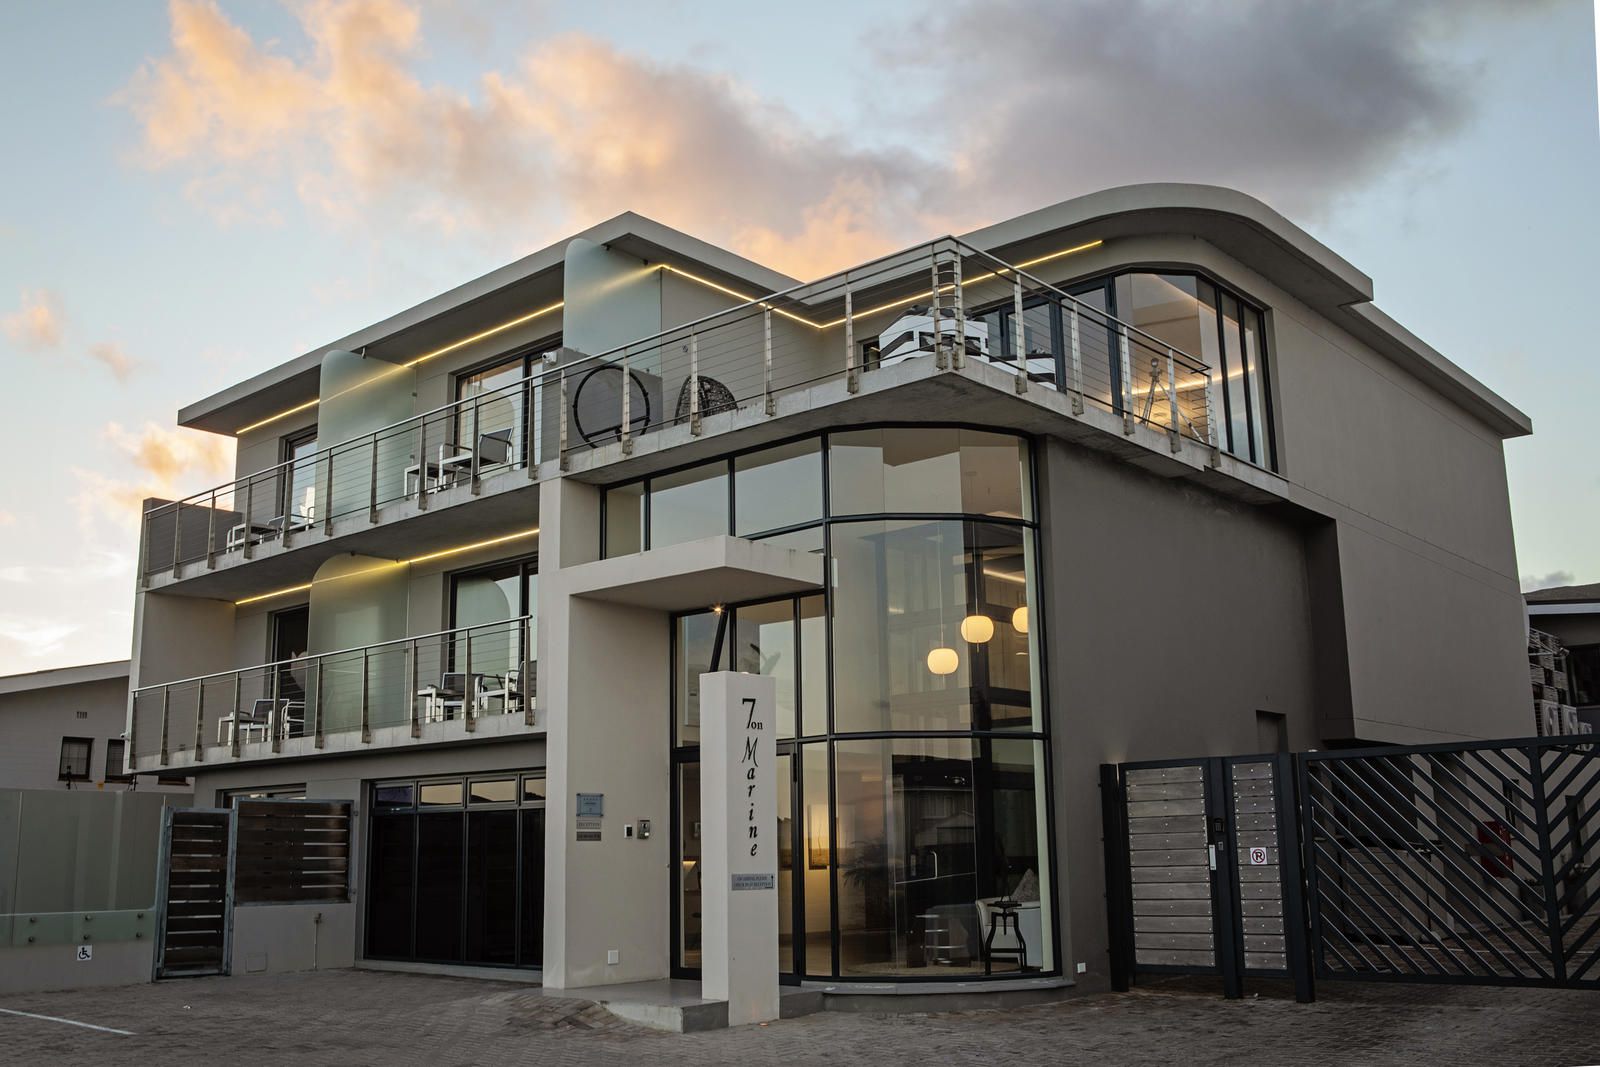 7 On Marine Hermanus Western Cape South Africa House, Building, Architecture